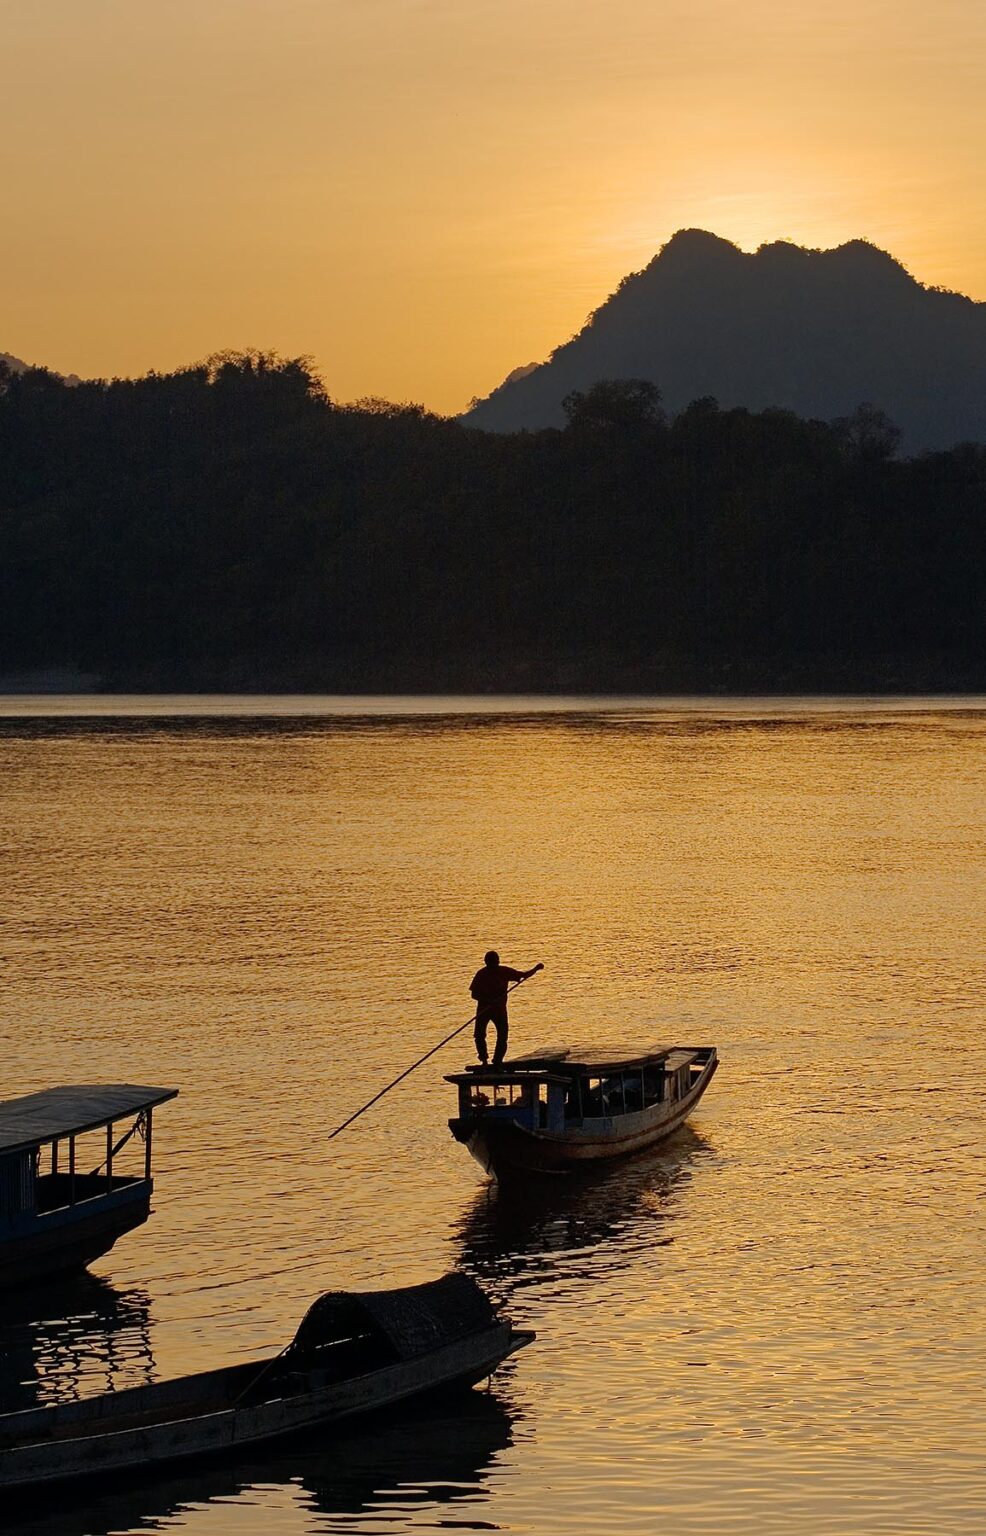 The sunsets on the Mekong River silhouetting a slow boat which is used for transportation - LUANG PROBANG, LAOS